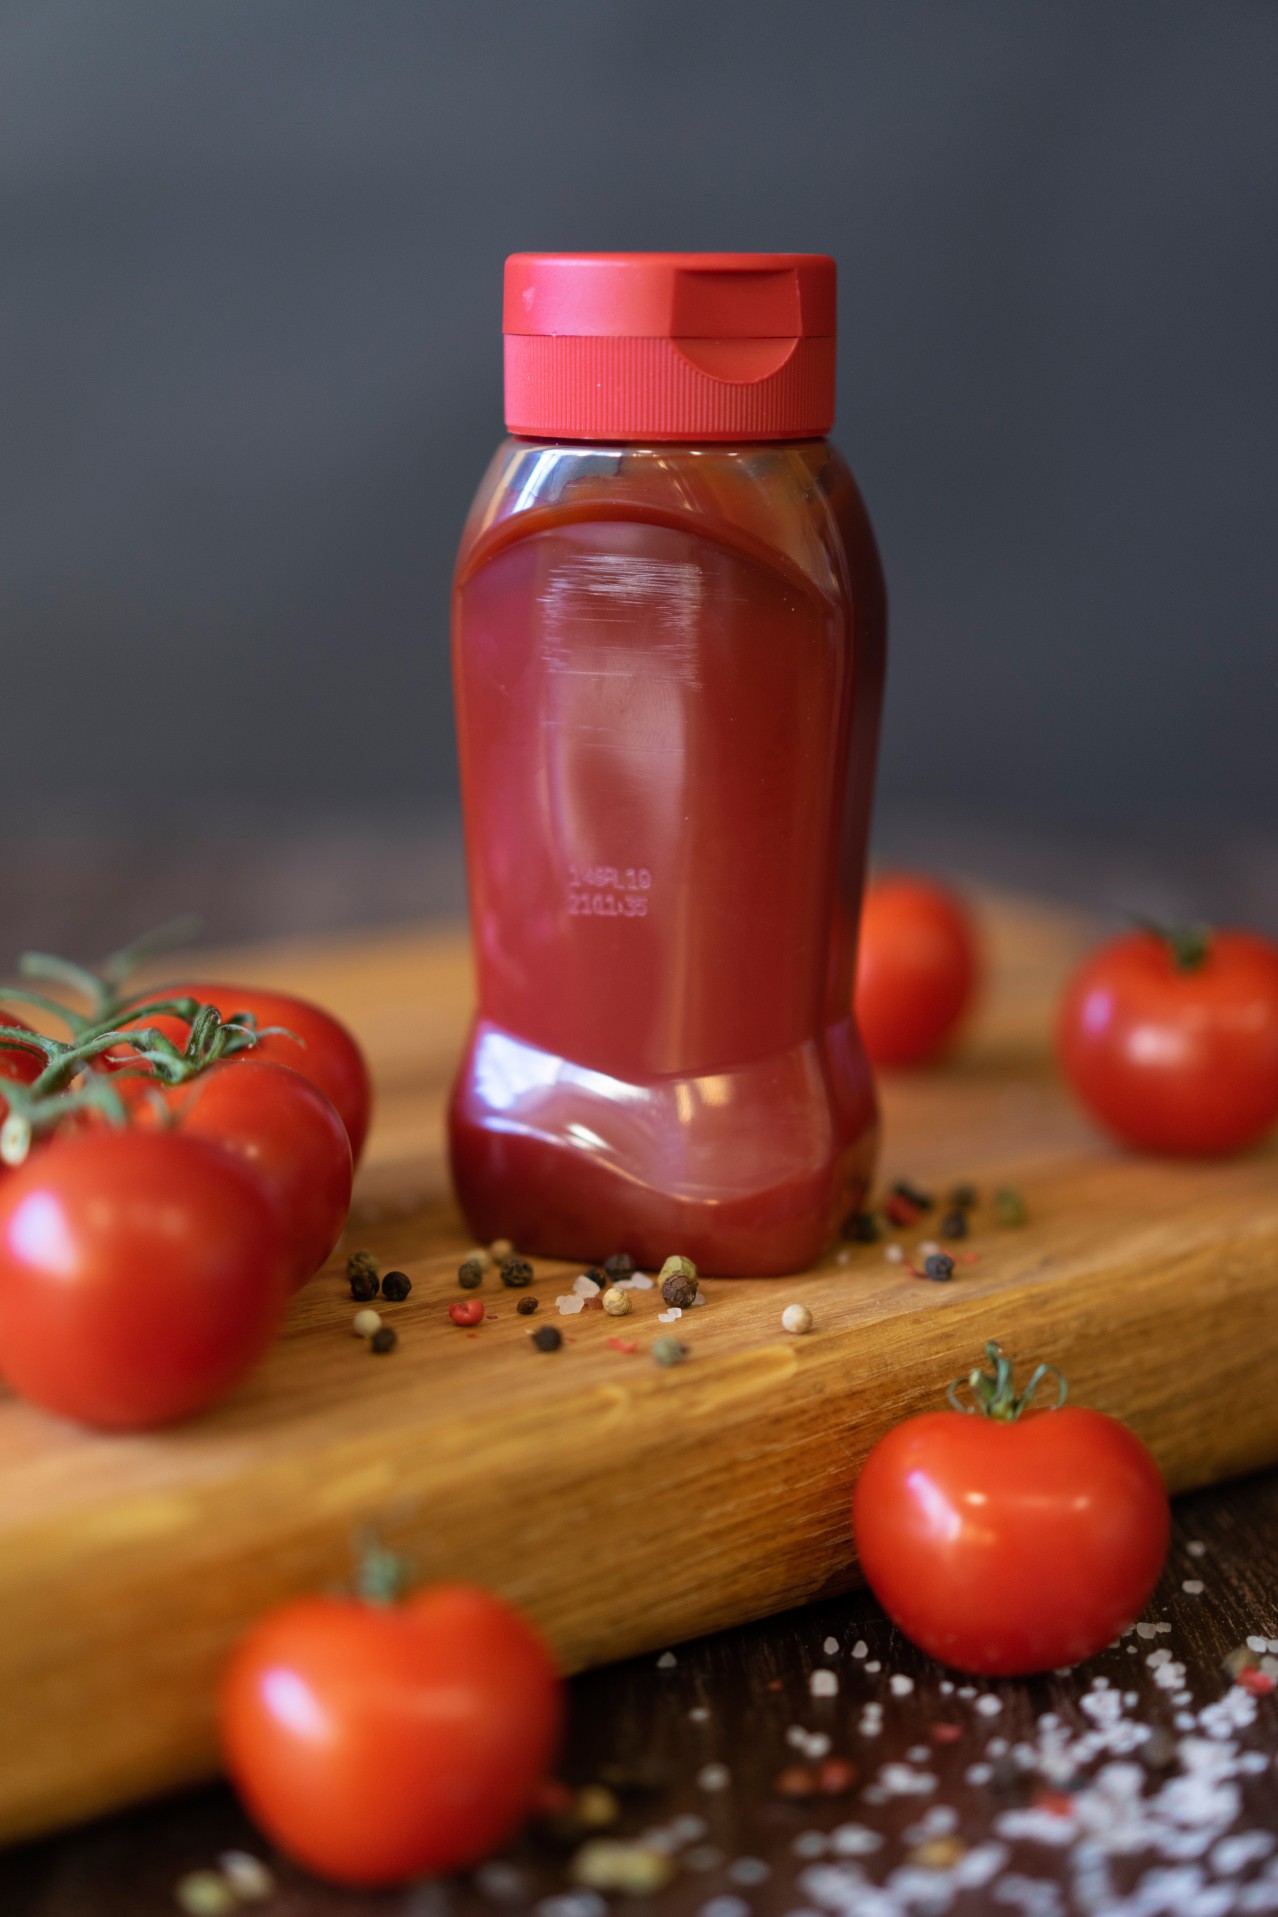 Red ketchup bottle on the cutting board